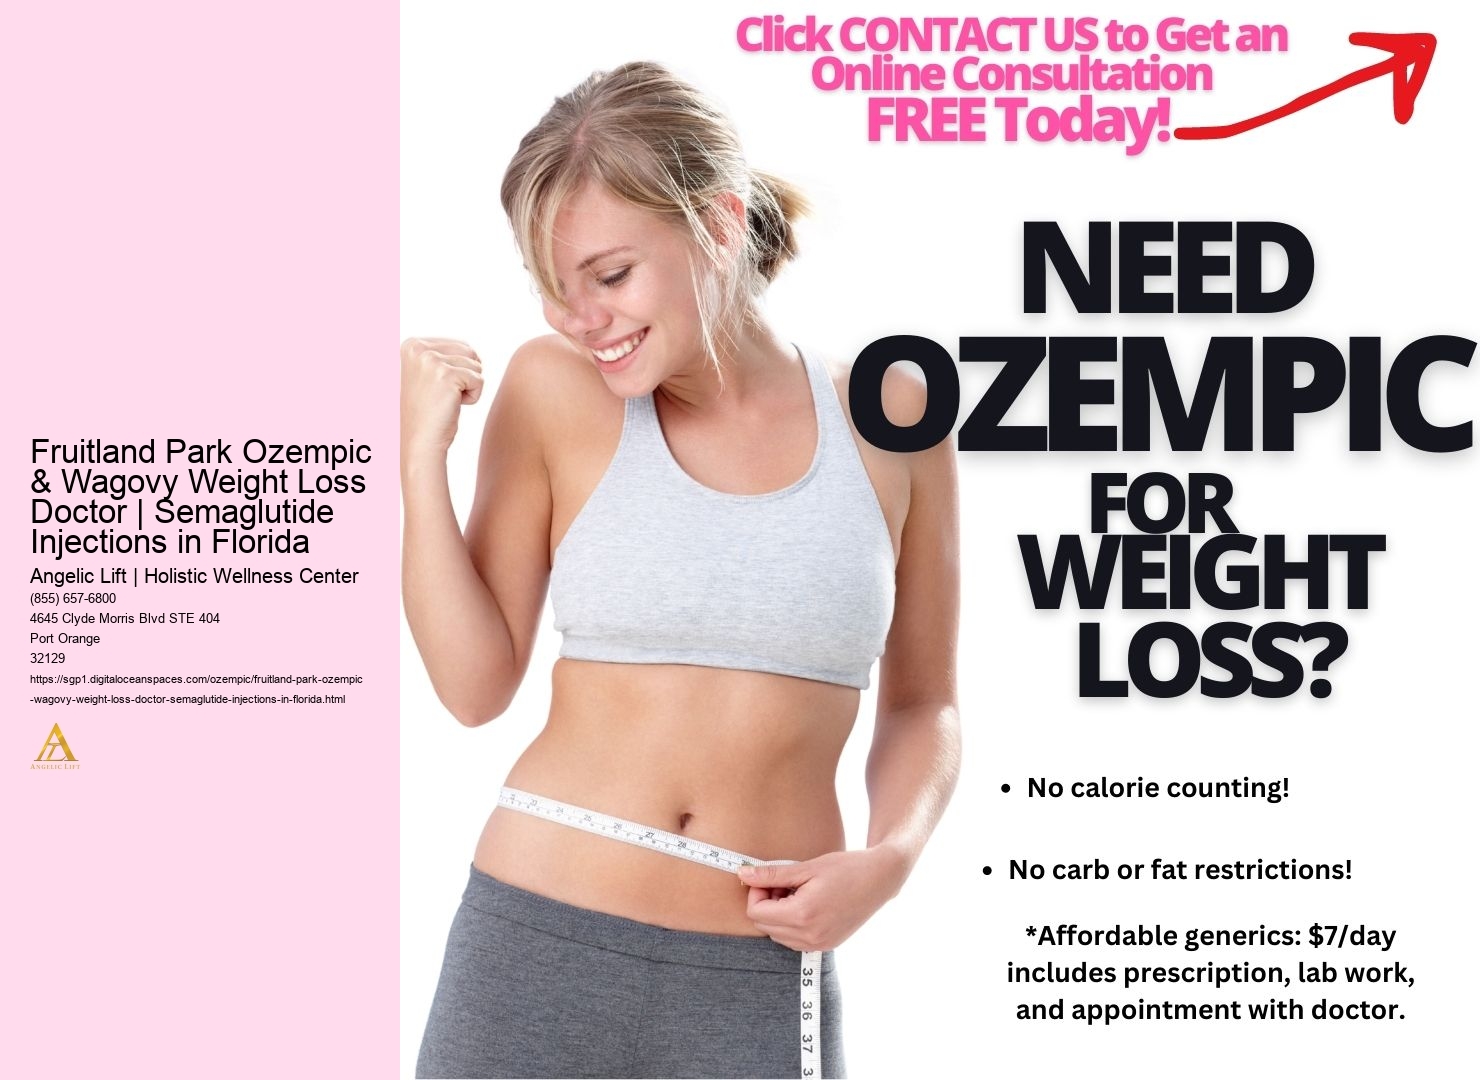 Fruitland Park Ozempic & Wagovy Weight Loss Doctor | Semaglutide Injections in Florida